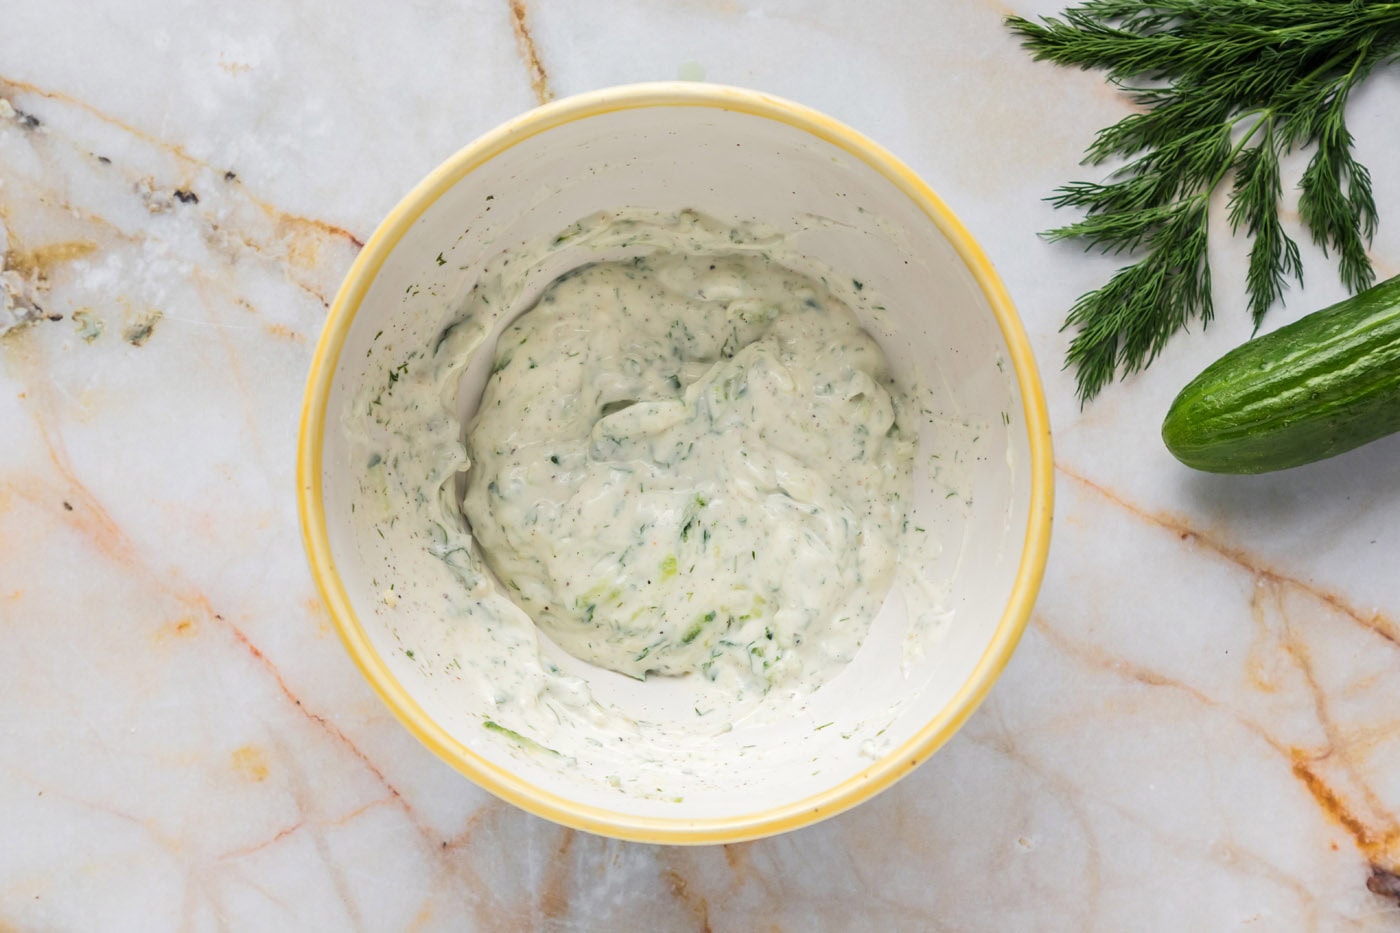 tzatziki sauce combined in a mixing bowl